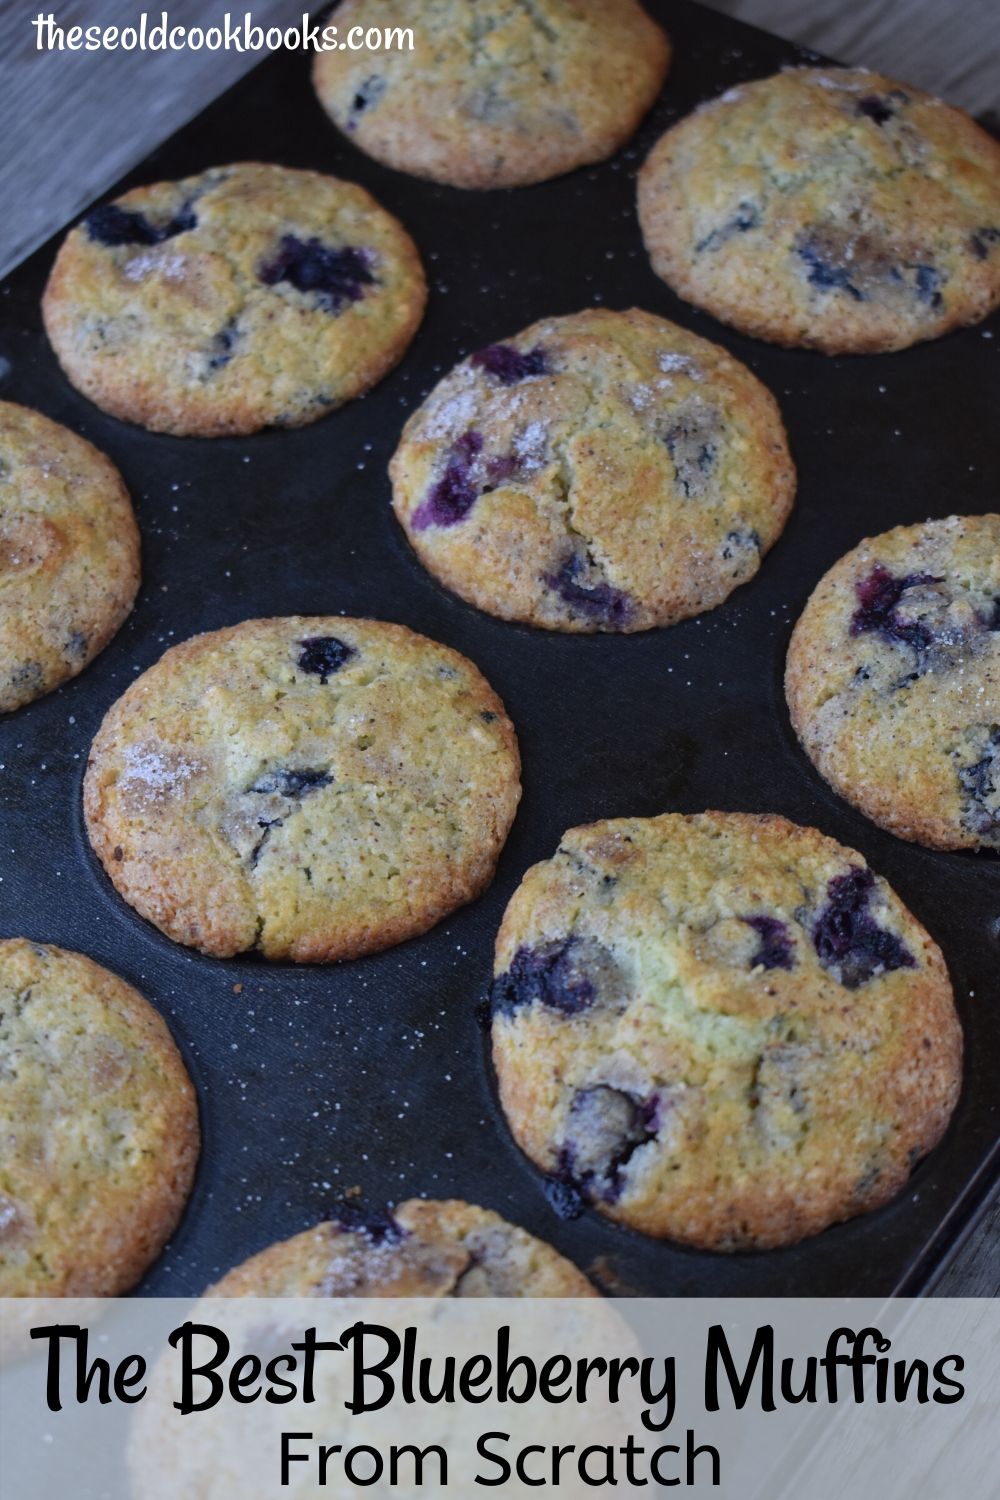 Our Blueberry Muffins from Scratch are the BEST EVER. No joke.  These bakery style muffins have a crispy muffin top that is sprinkled with nutmeg and sugar before baking, and the center is a soft and delicate just like a muffin should be.